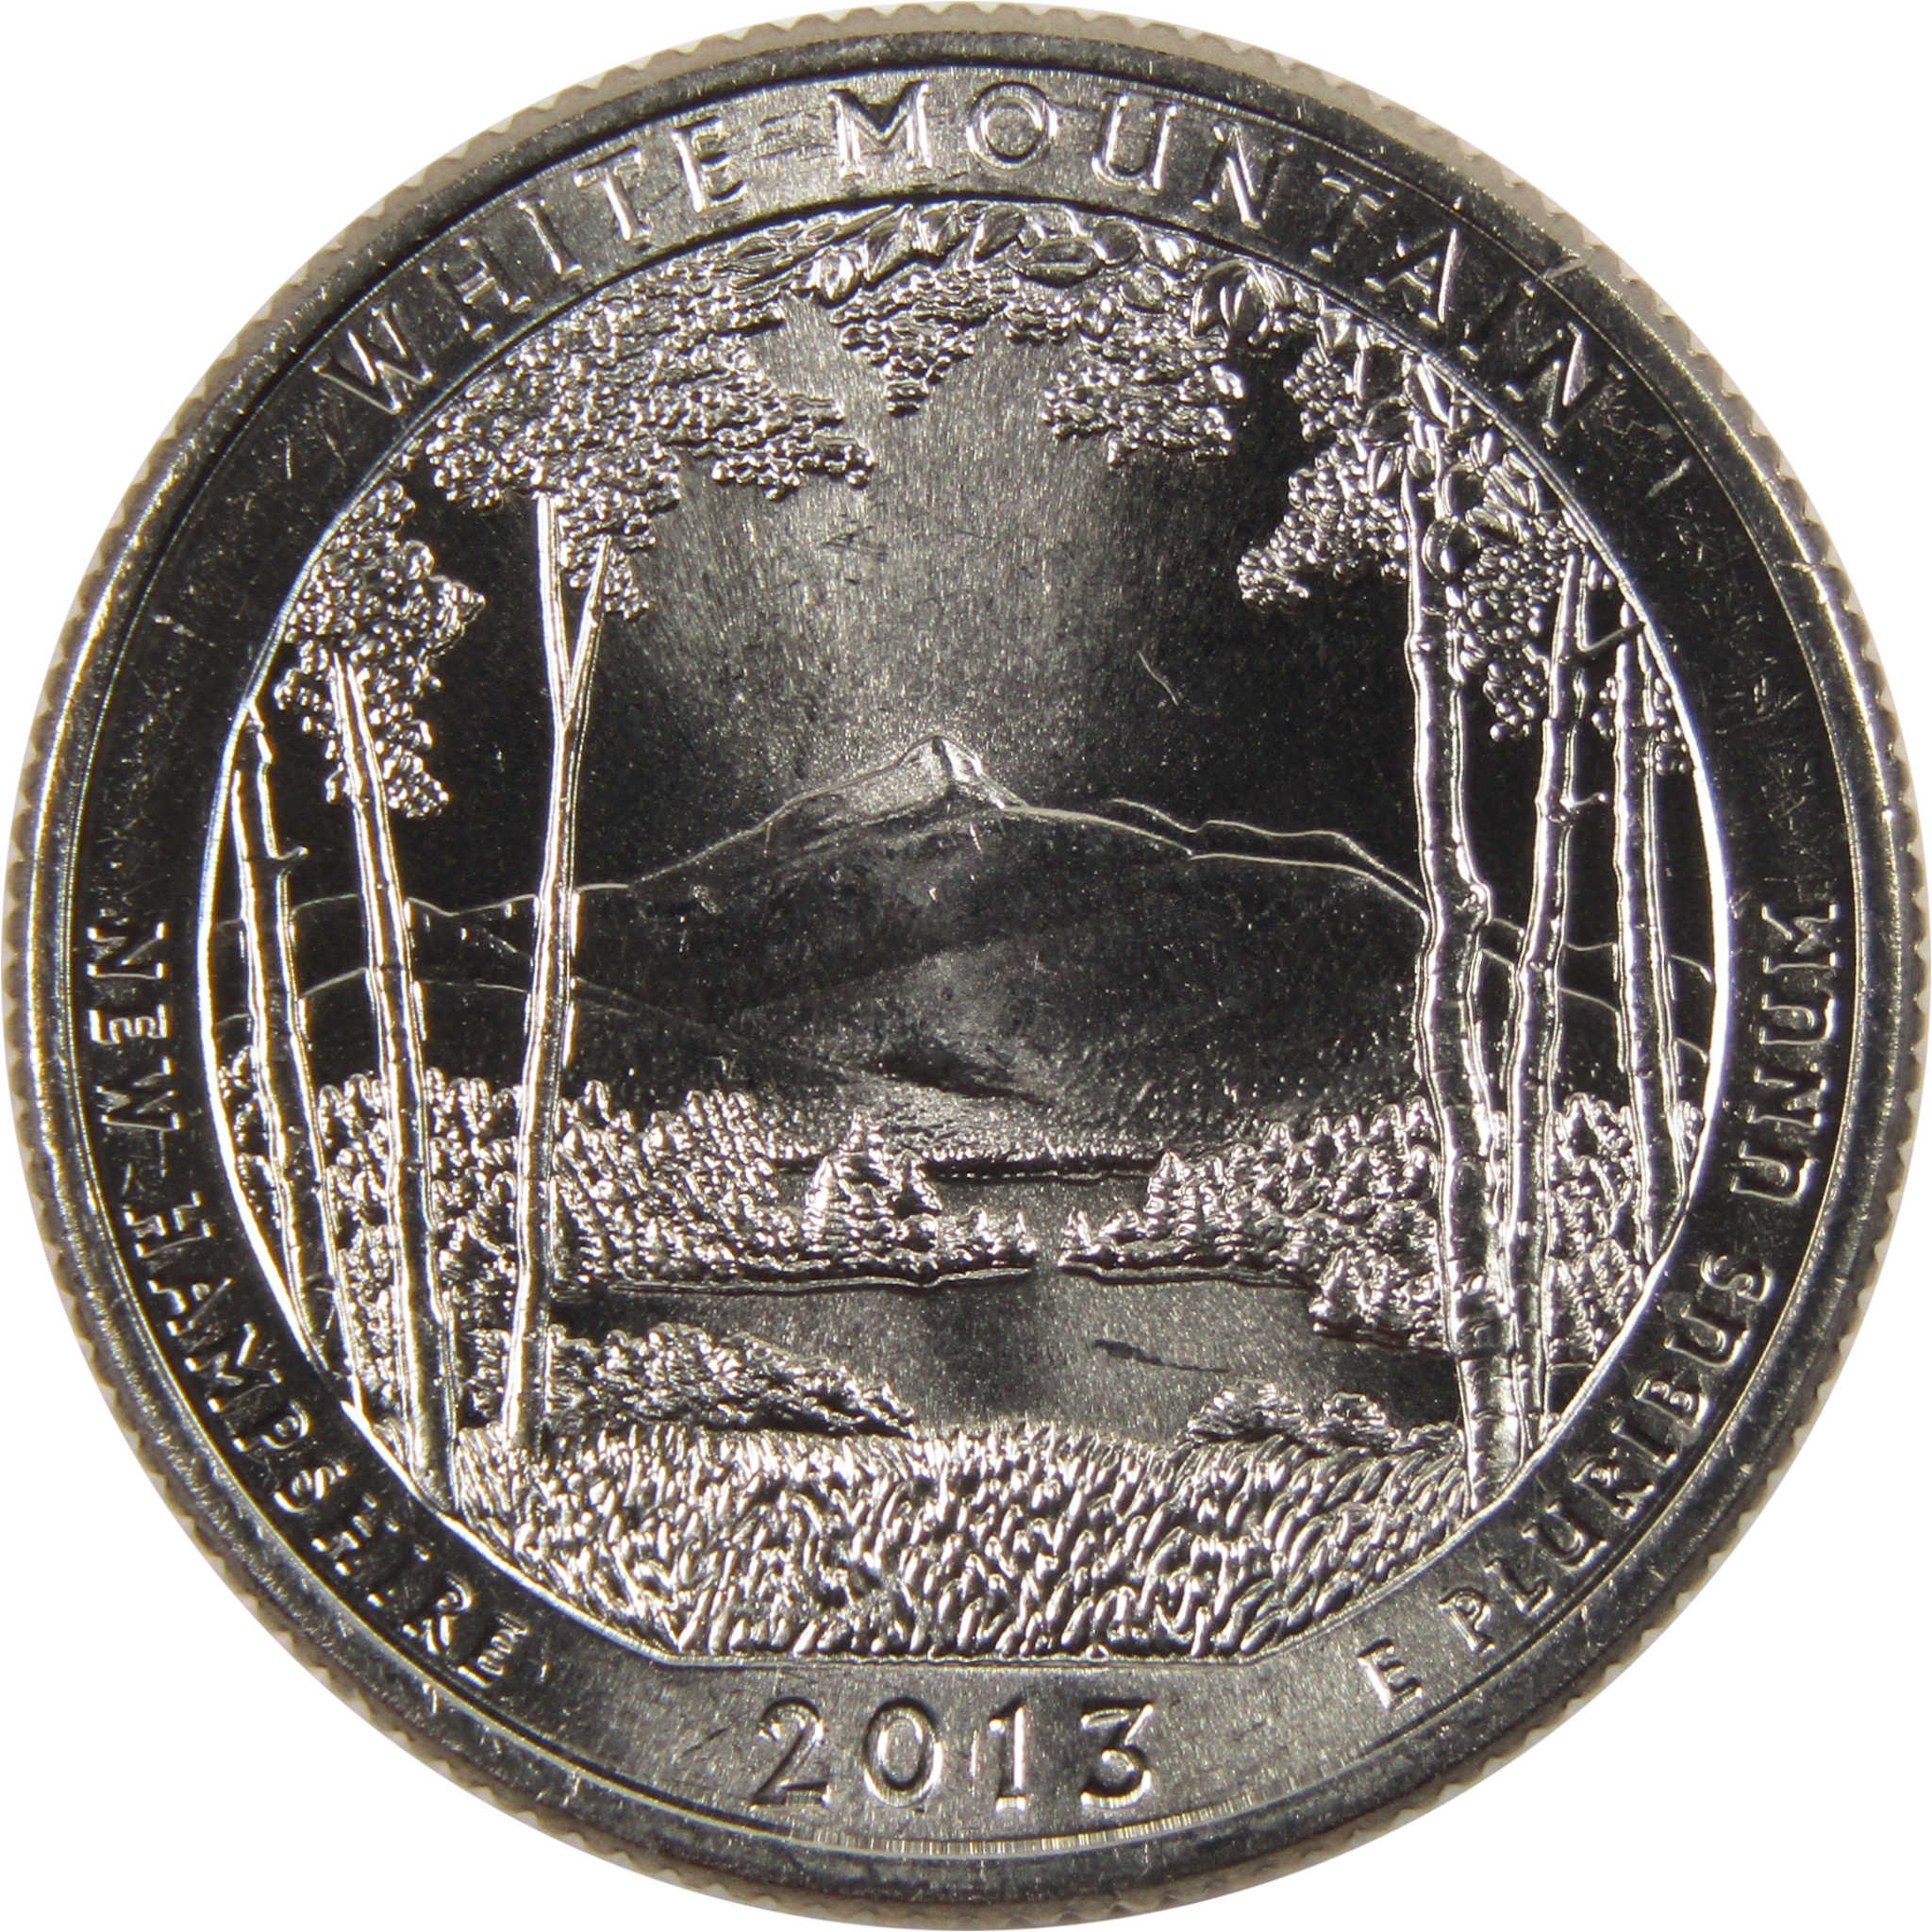 2013 D White Mountain National Forest Quarter BU Uncirculated Clad 25c